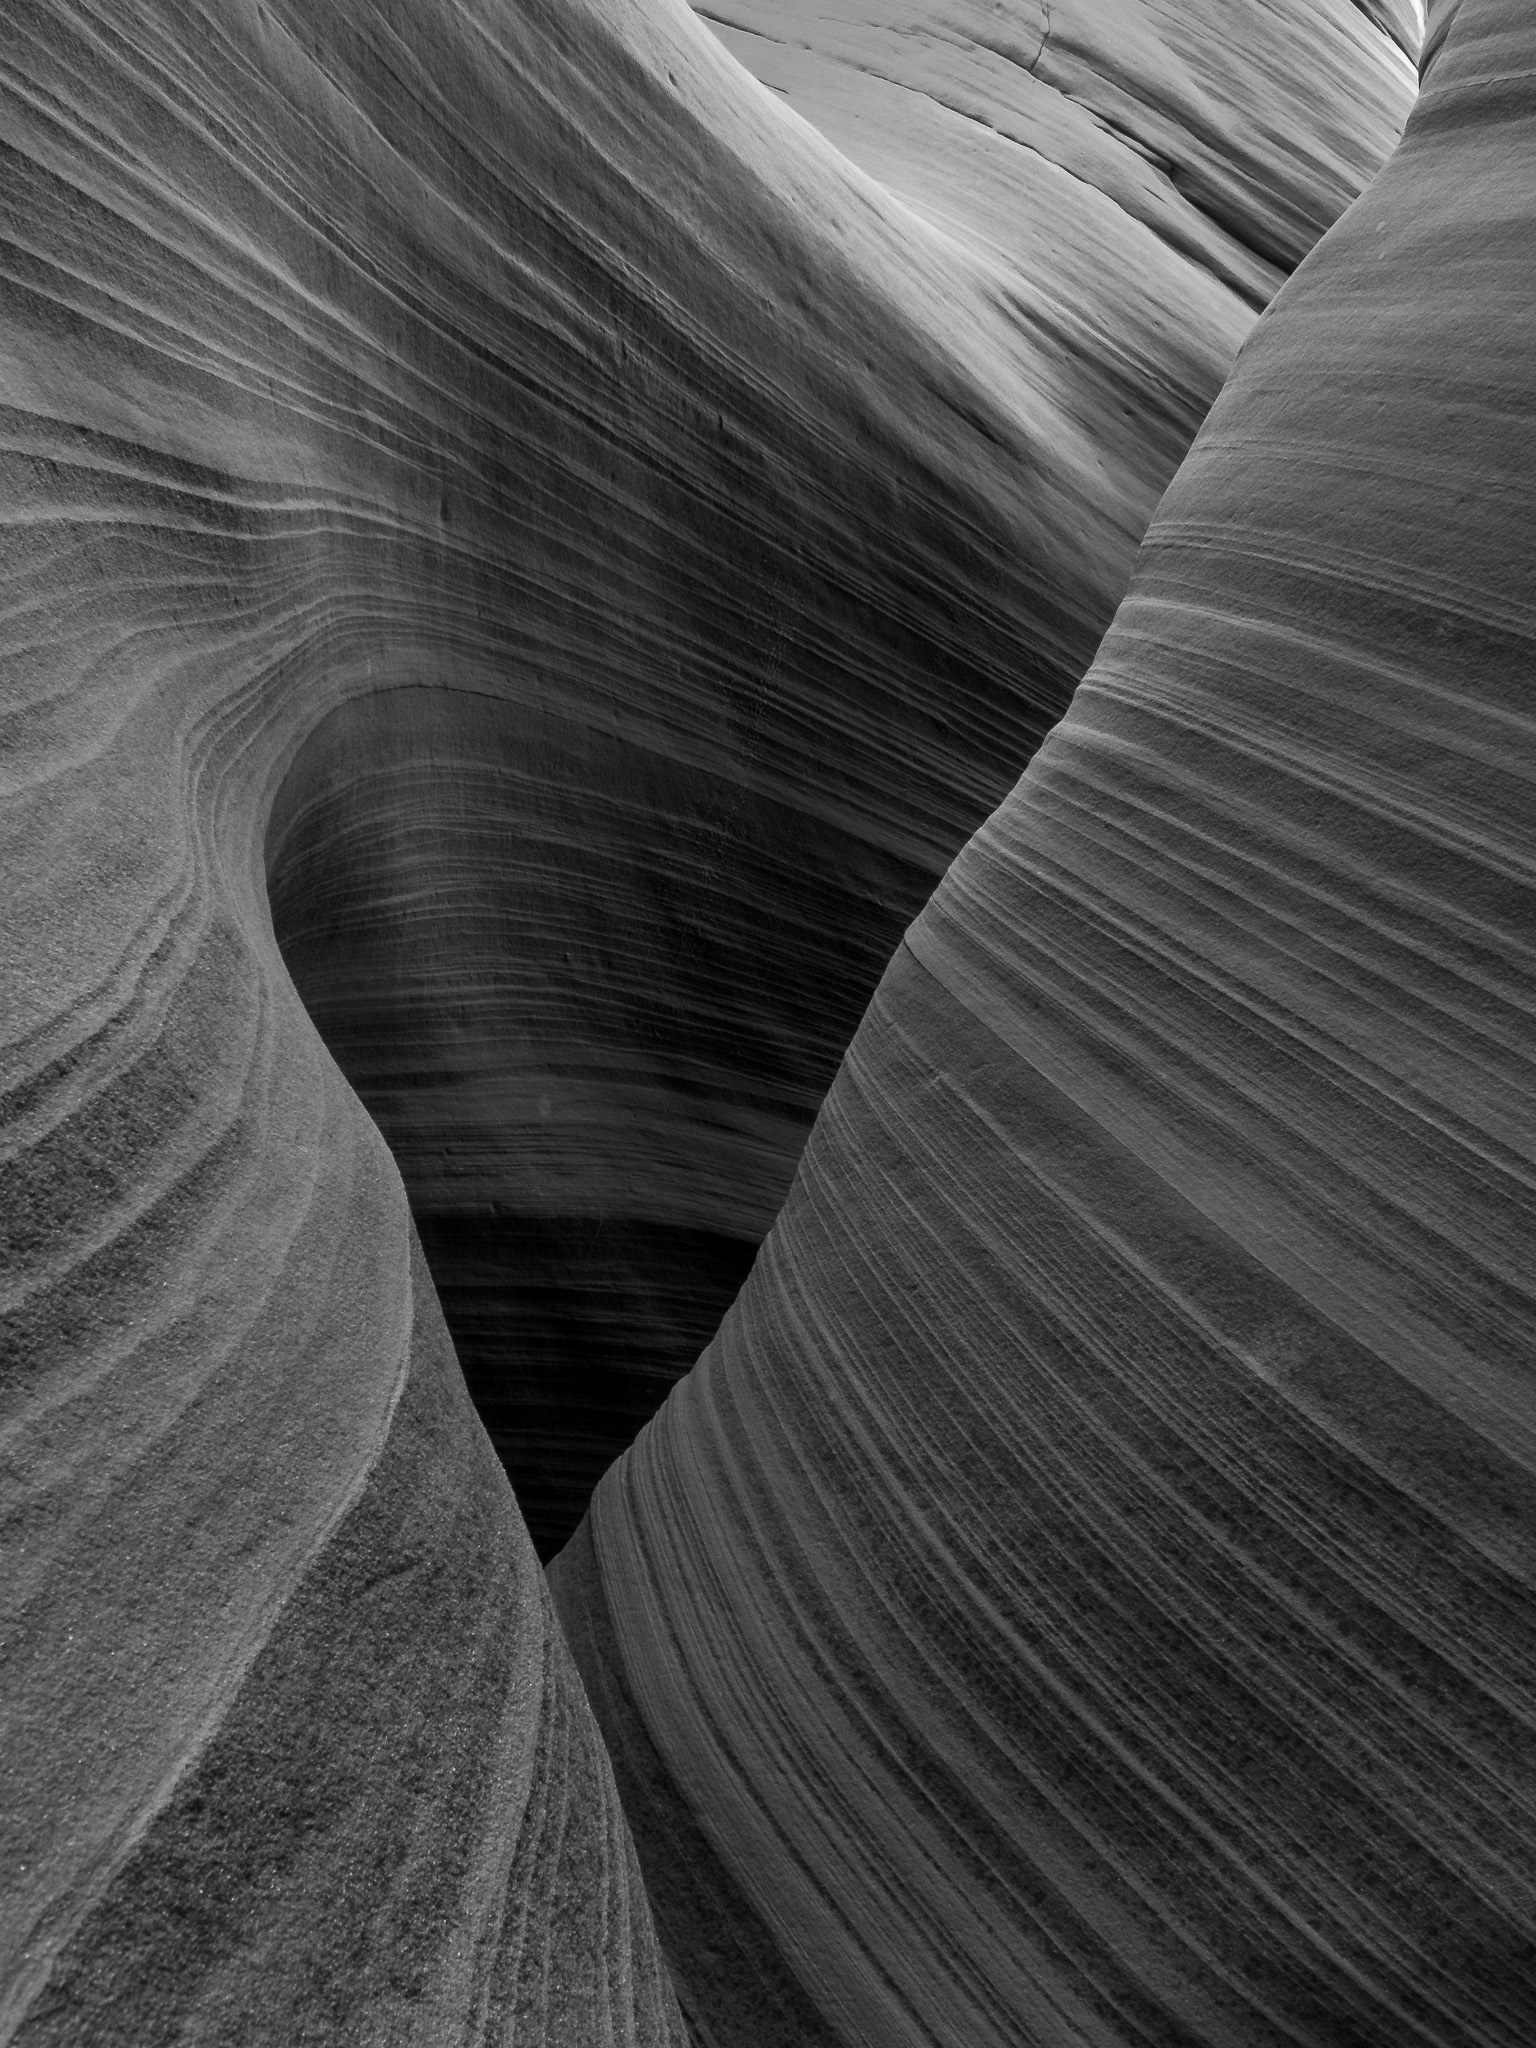 Rock Structures in Antelope Canyon